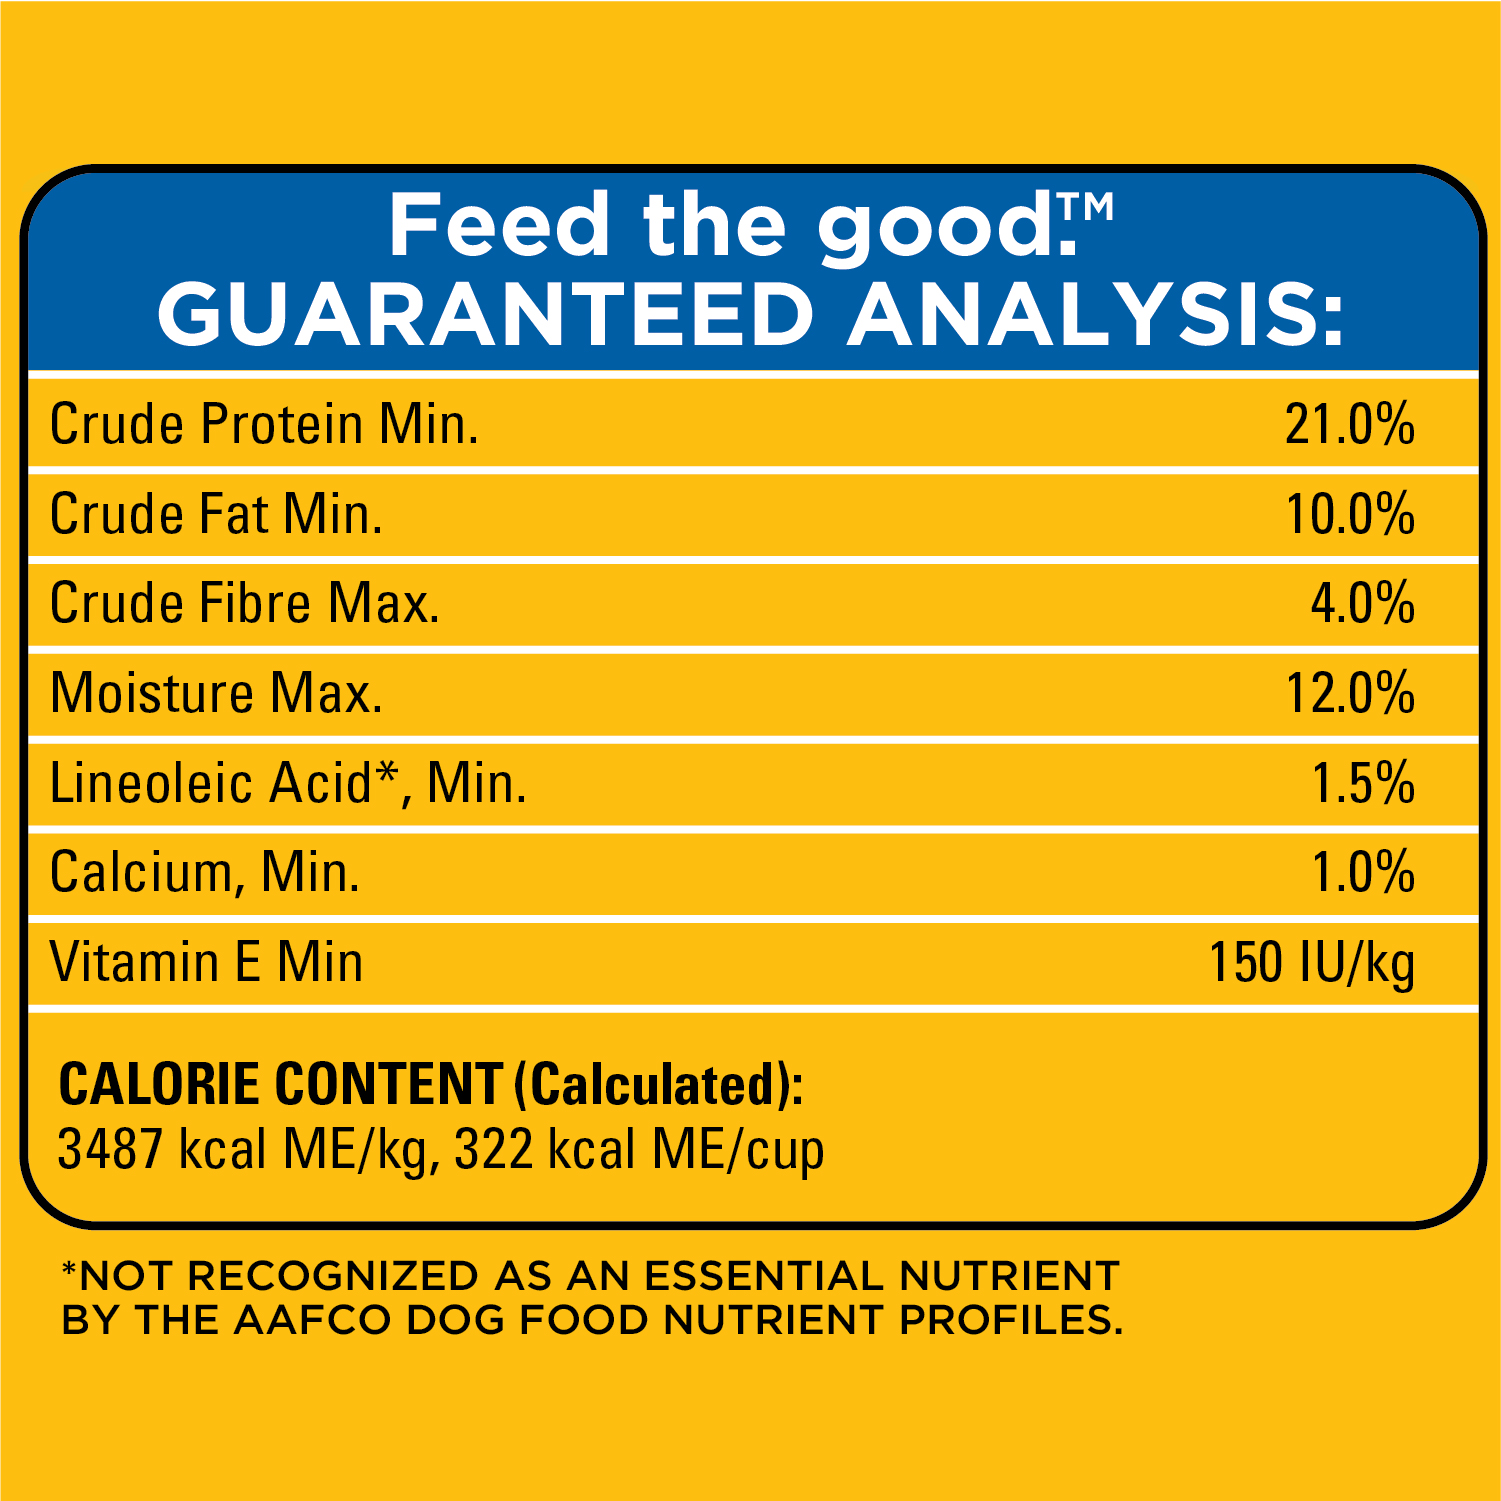 PEDIGREE® VITALITY+ ROASTED CHICKEN & VEGETABLE FLAVOUR DRY DOG FOOD guaranteed analysis image